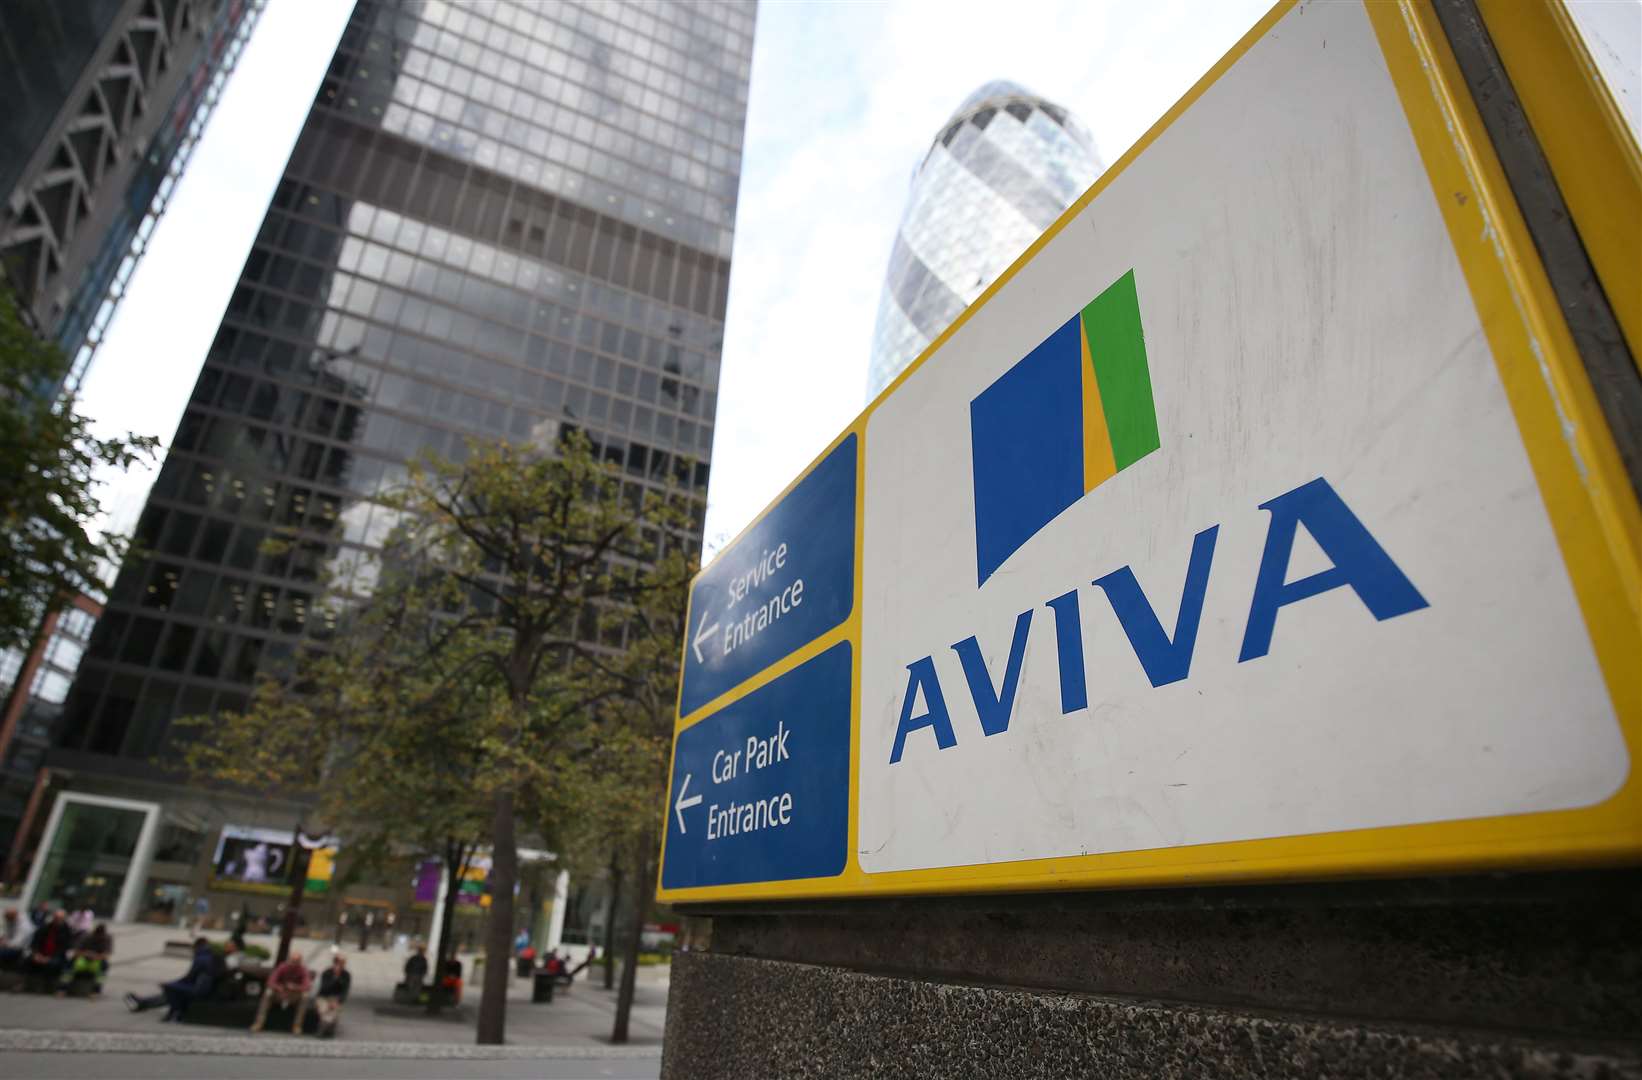 Aviva is one of two insurers being taken to court by policyholders who are angry at not getting money (Philip Toscano/PA)